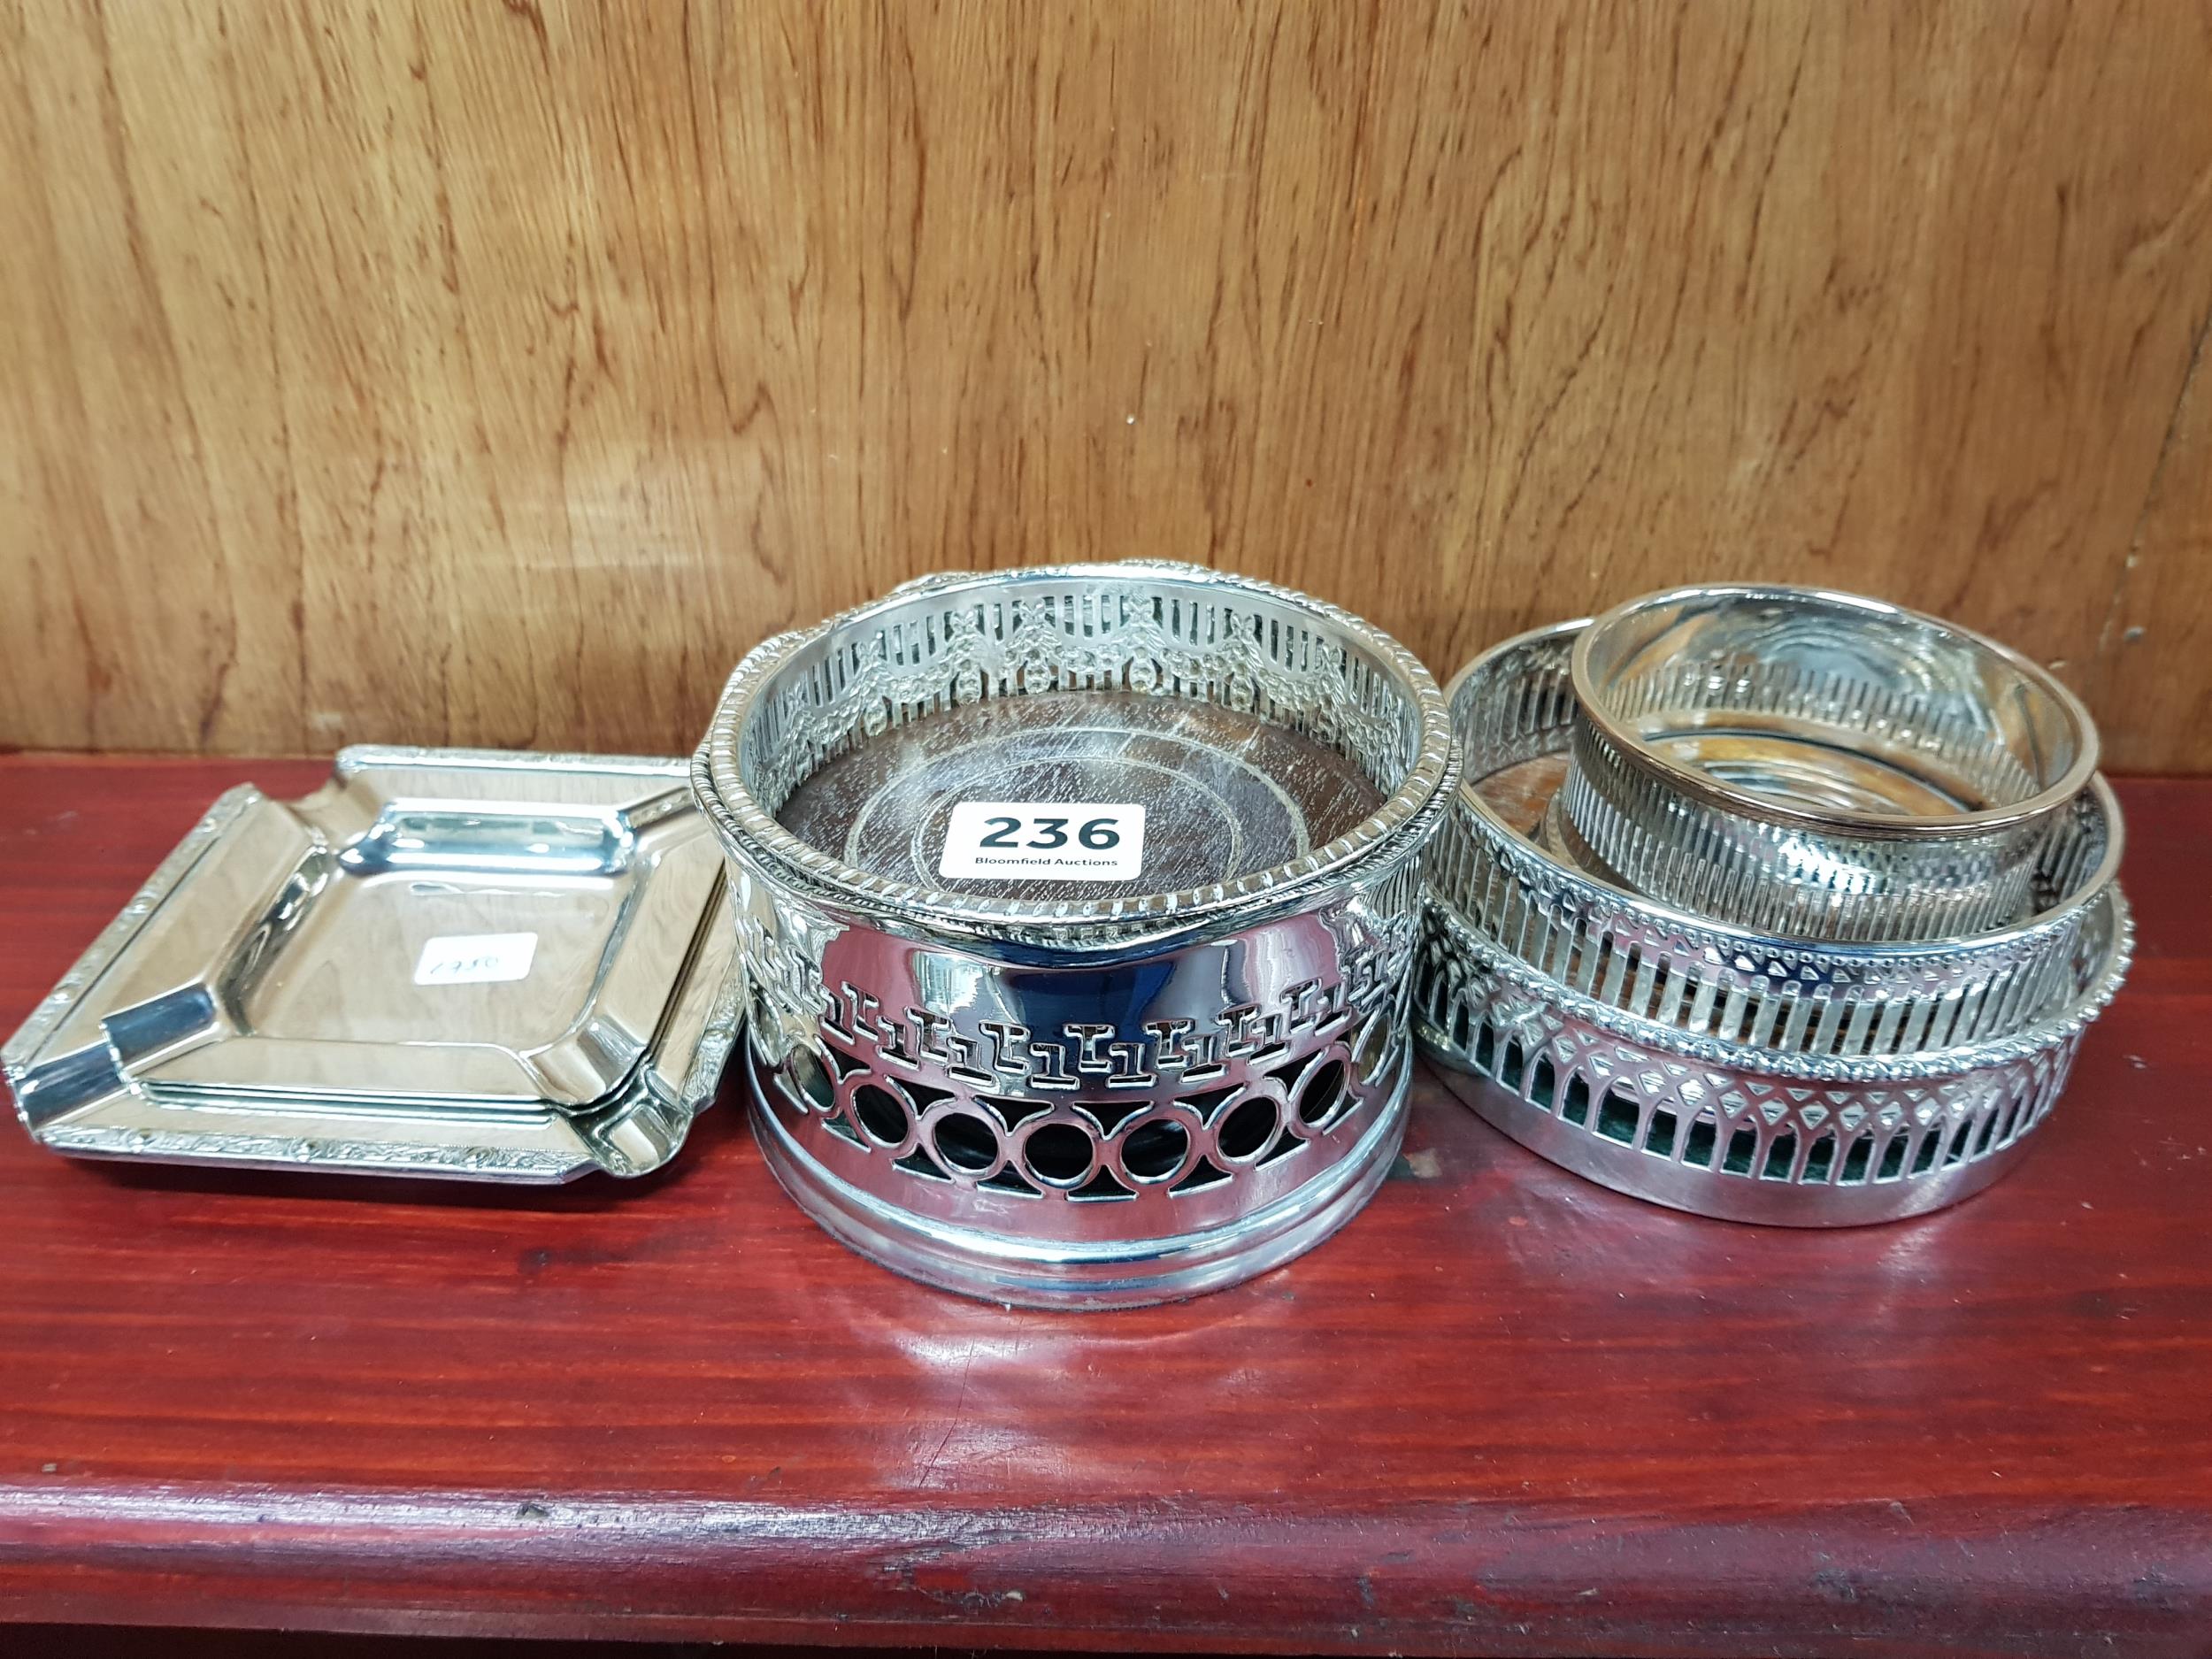 ASSORTMENT OF 5 SILVER PLATED COASTERS AND 3 ASHTRAYS